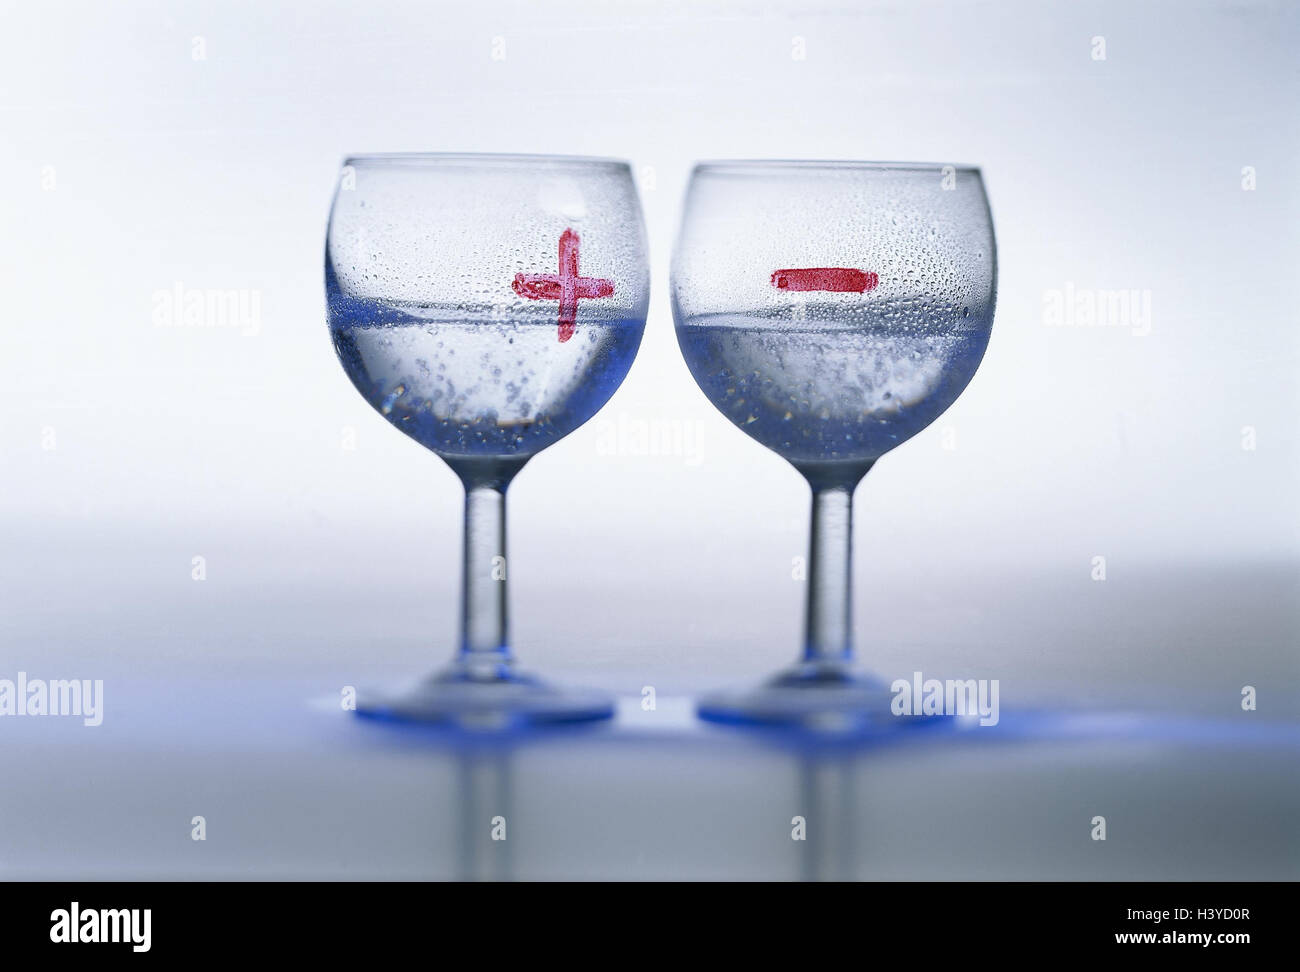 Water glasses, expression, 'The glass are half-filled - the glass is half-empty', Still life, product photography, glasses, label, marks, paints, figures, icons, plus, below, +, - mineral water, drink, drinking, alcohol-free, anti-alcoholic, weigh, assess Stock Photo